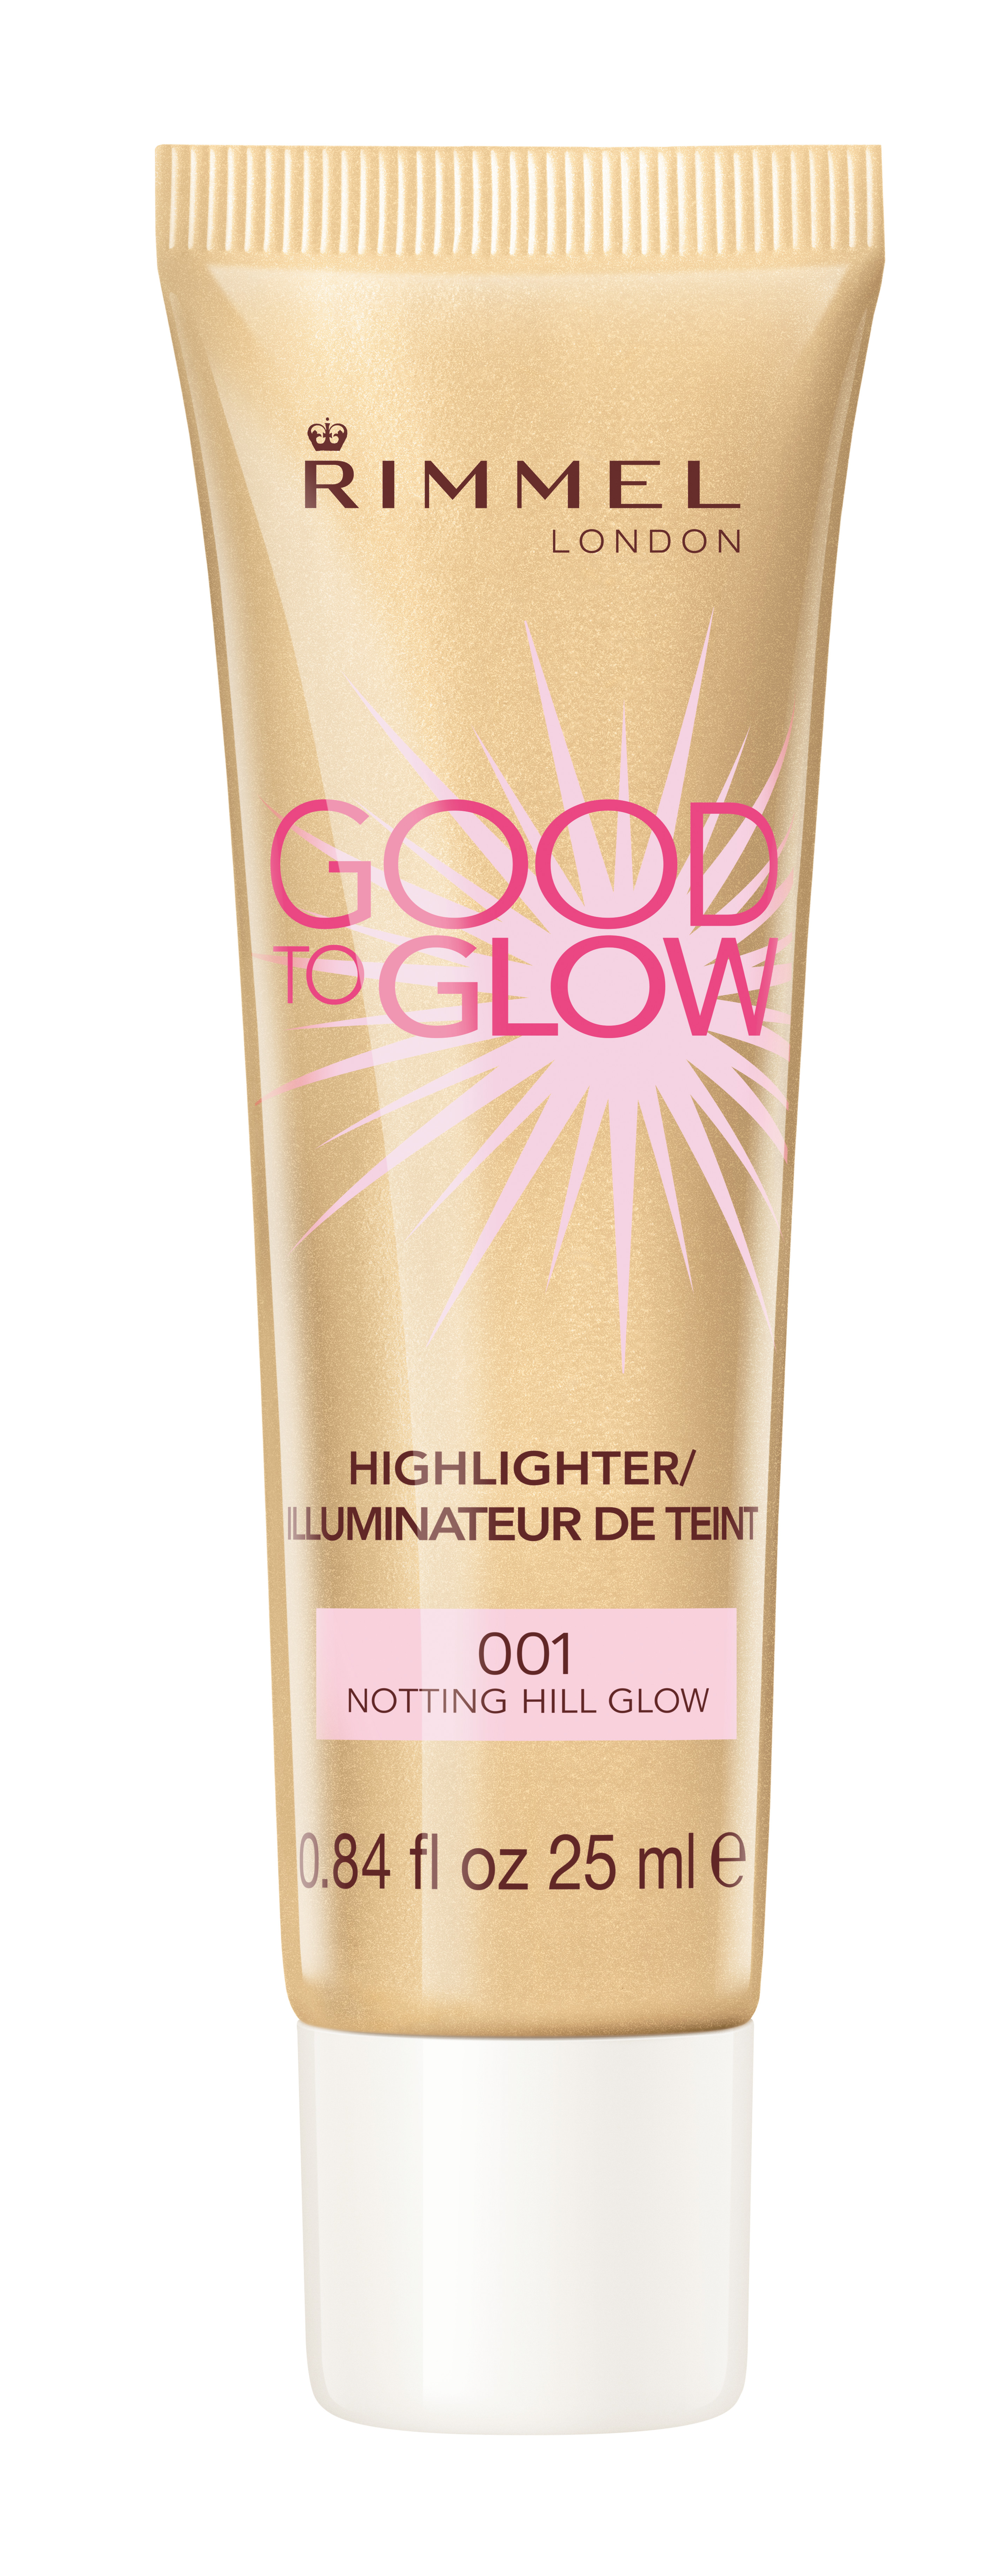 Rimmel London Good to Glow Highlighter, Notting Hill Glow - image 1 of 2